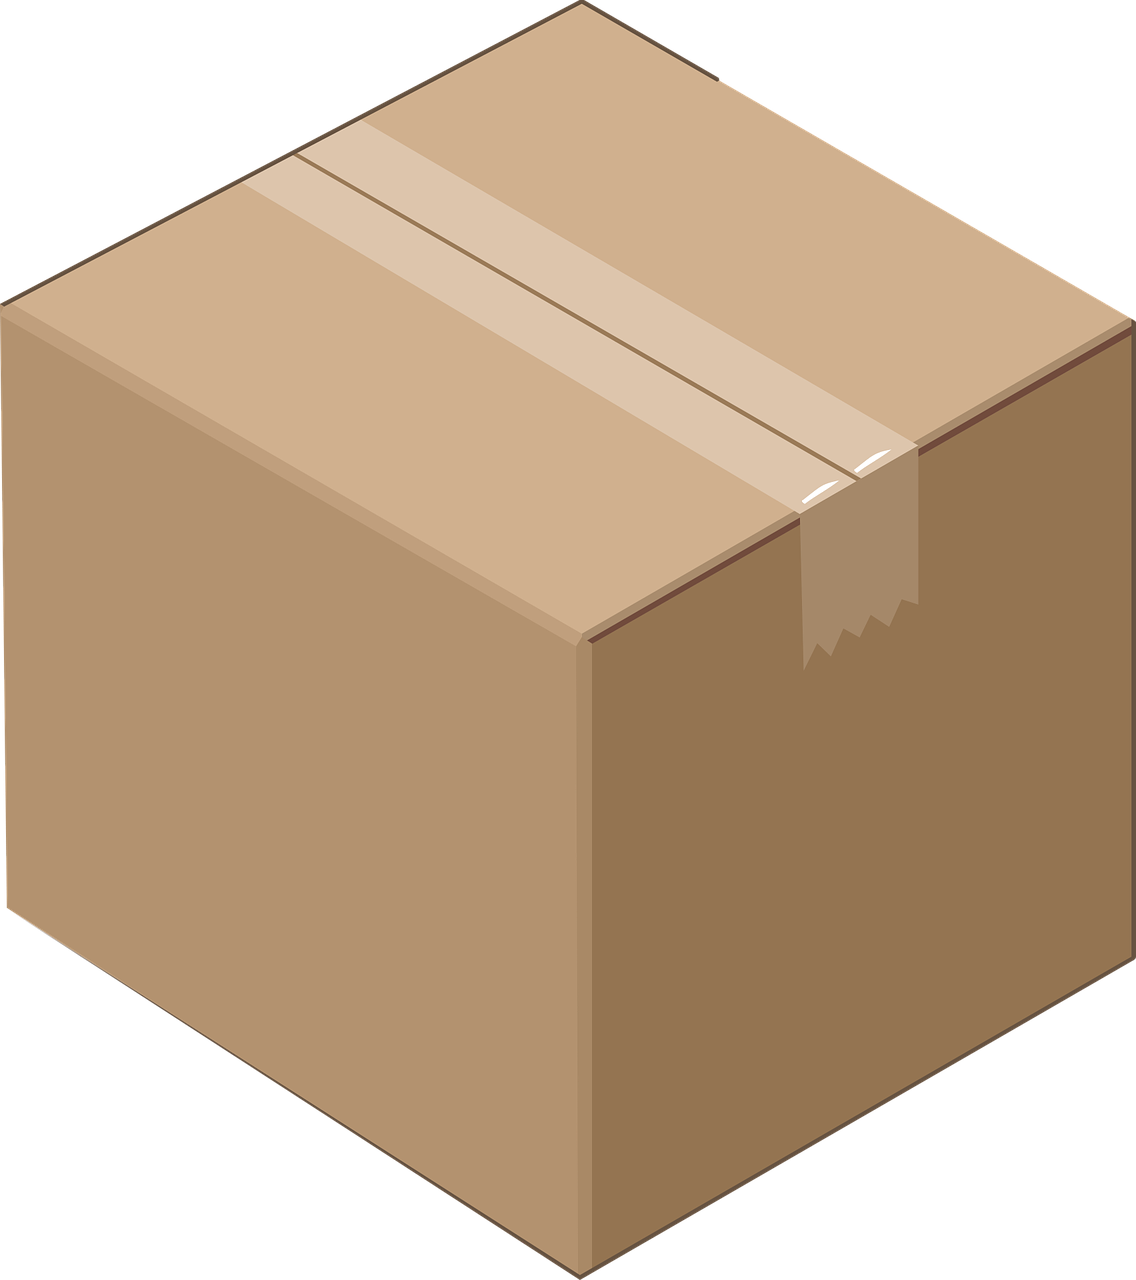 A plain cardboard box represents the Uber Android first codebase: one big box of code.